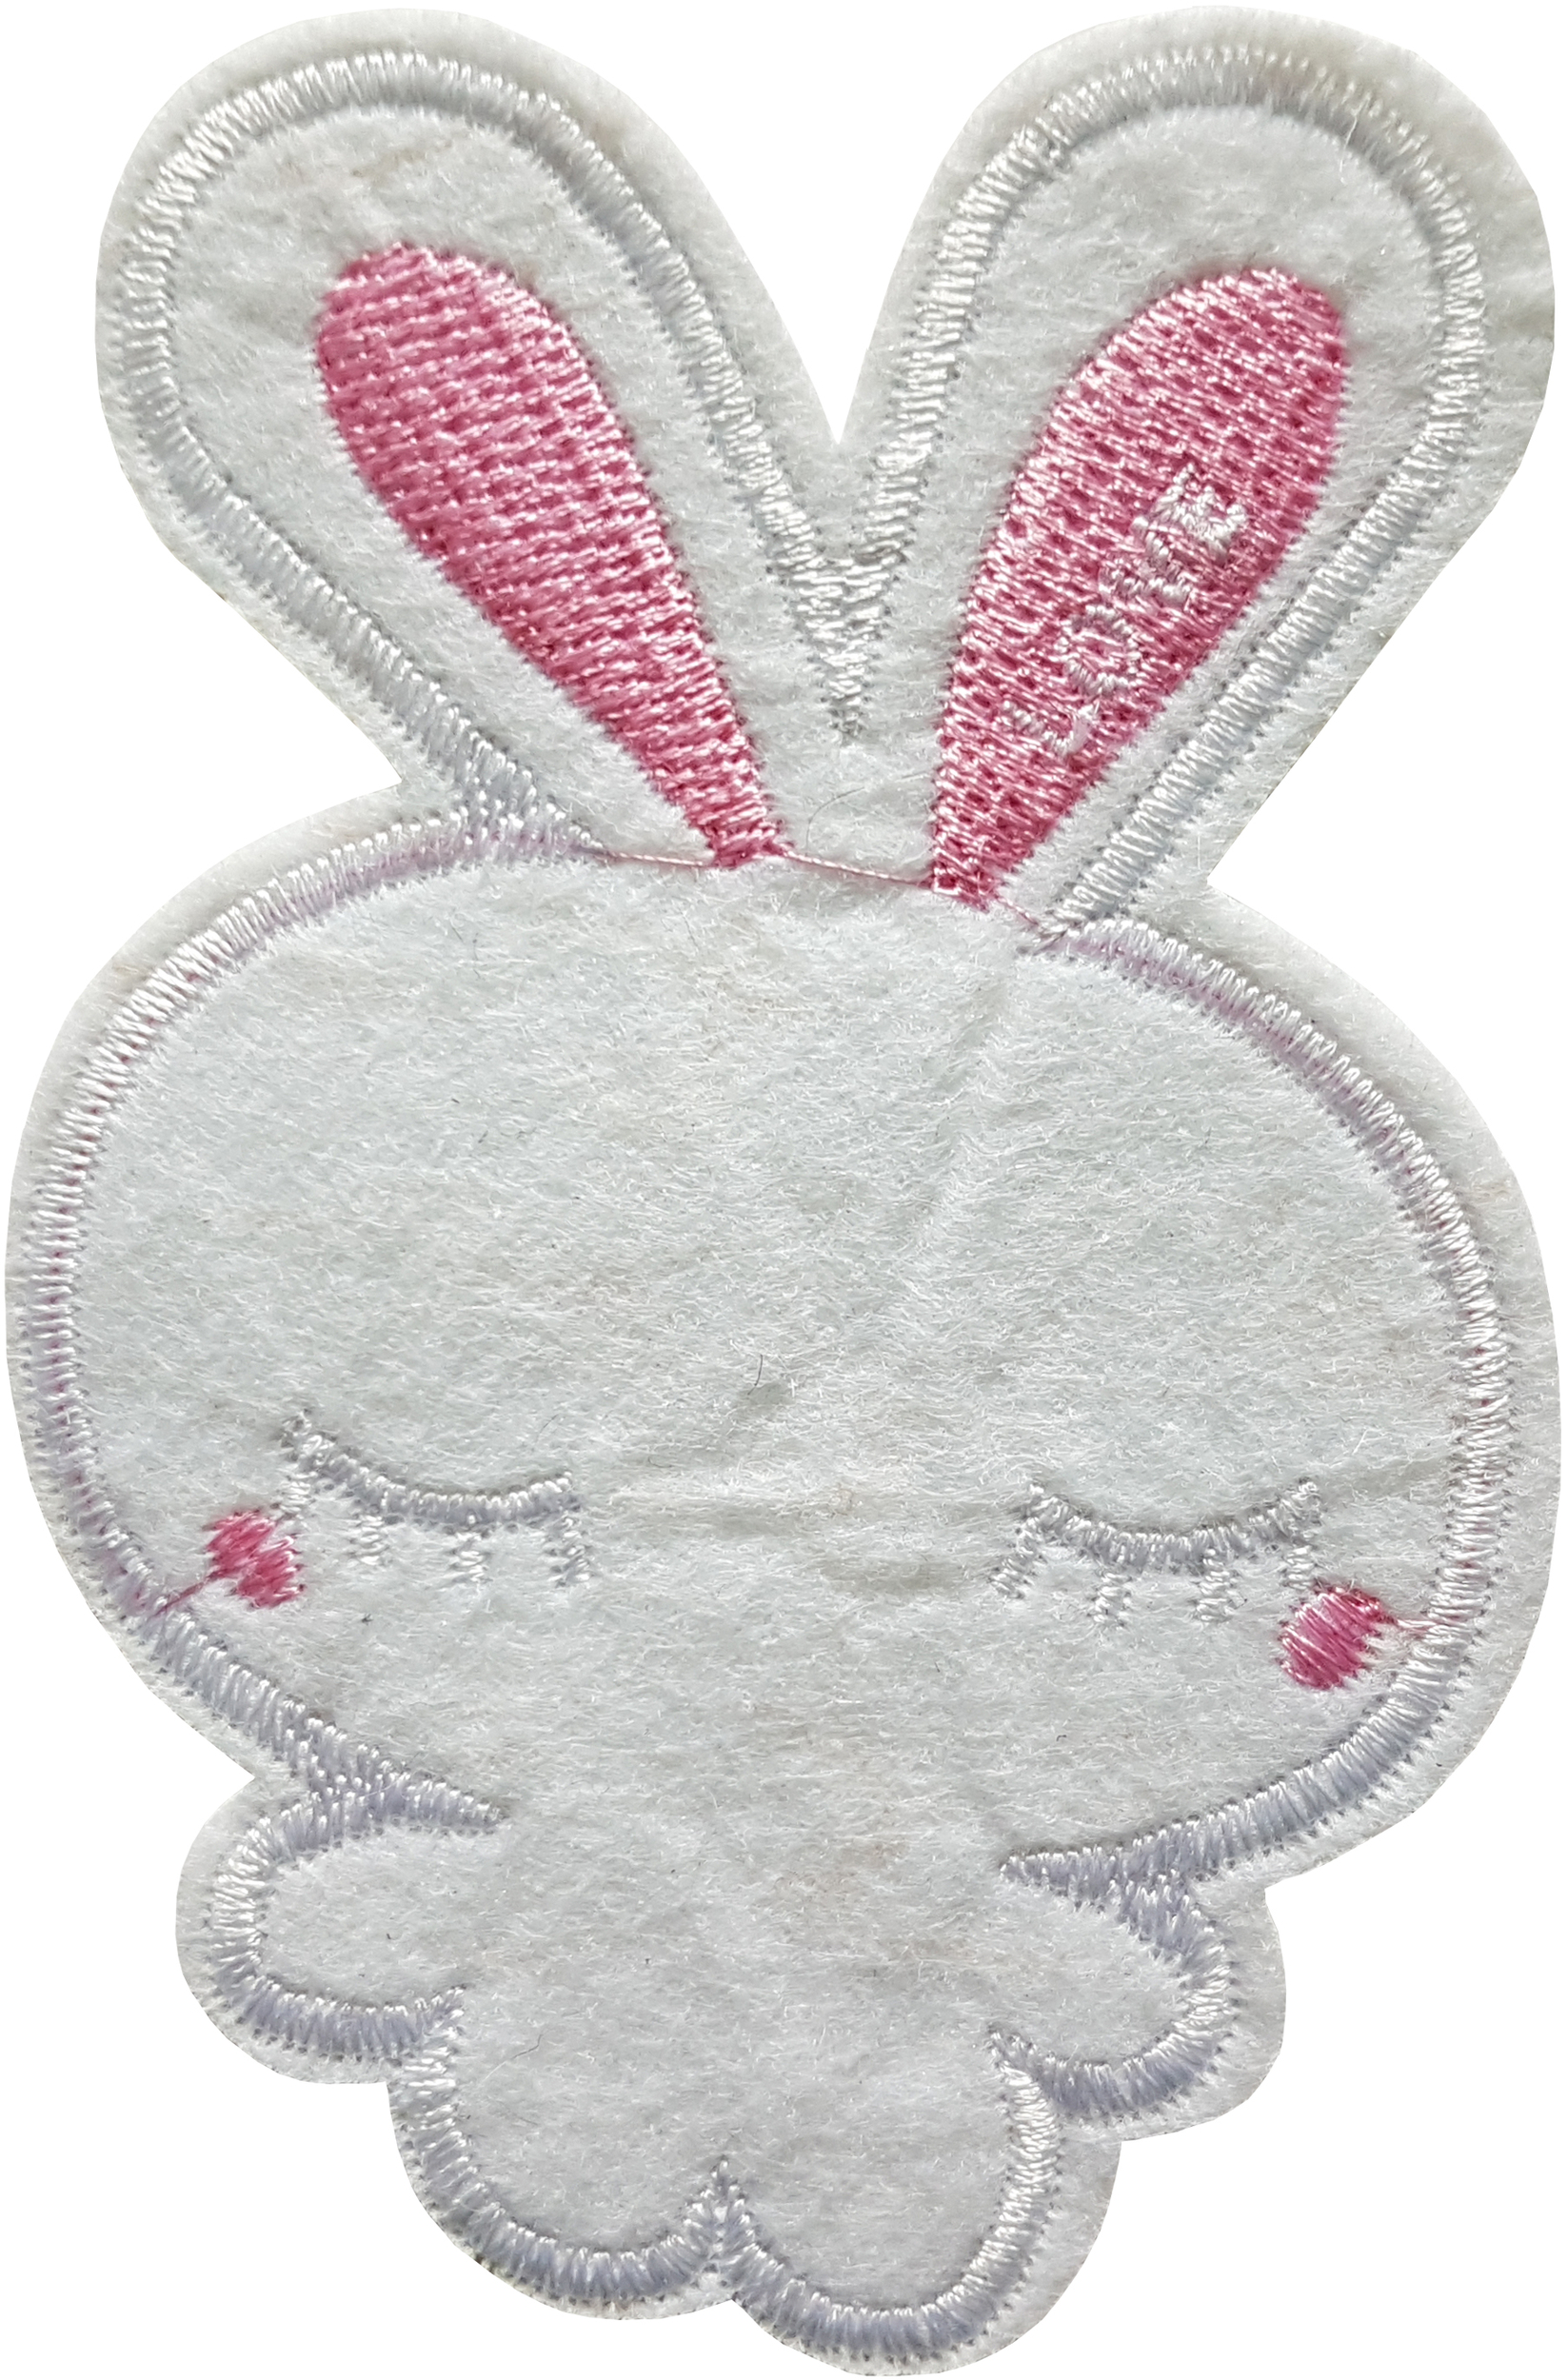 Patch Thermocollant Lapin Blanc et Rose